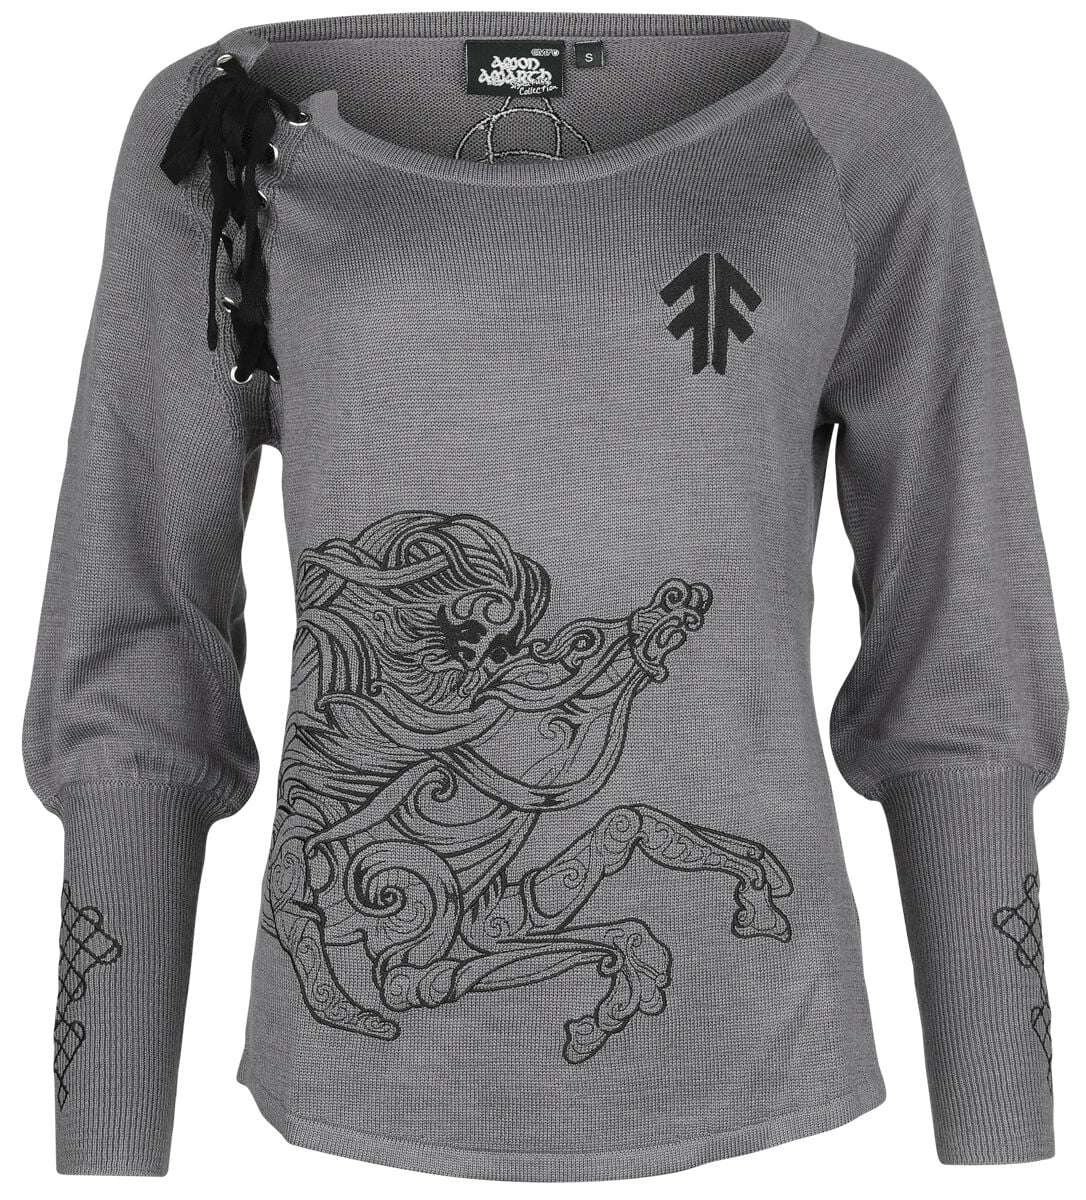 Amon Amarth Knit jumper - EMP Signature Collection - S to XXL - for Women - grey